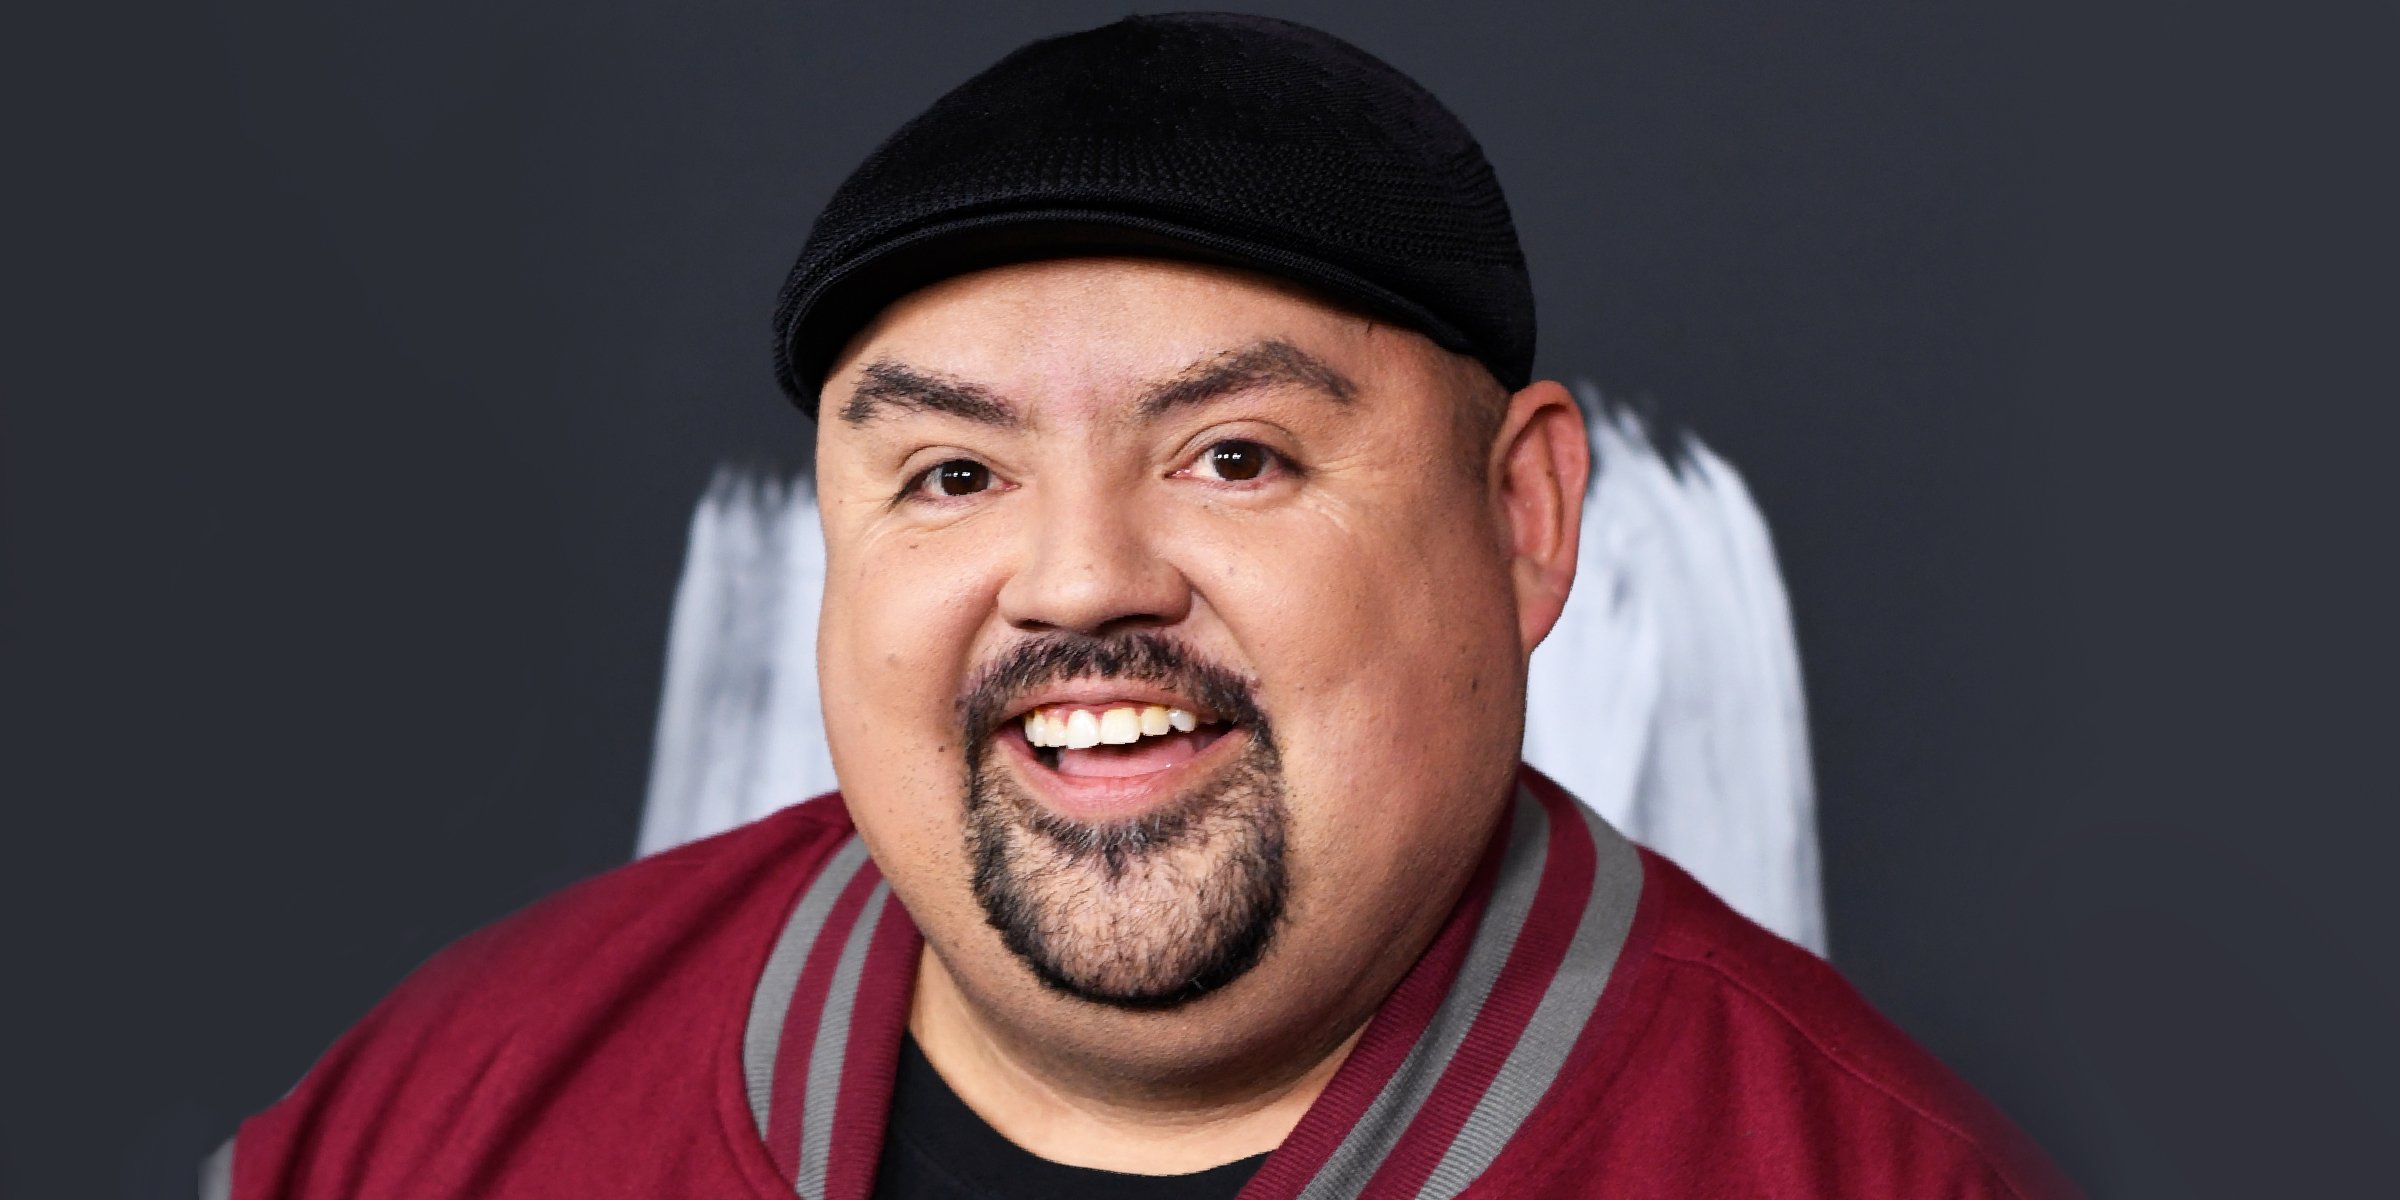 Gabriel Iglesias S Relationship With Claudia Valdez Ended In